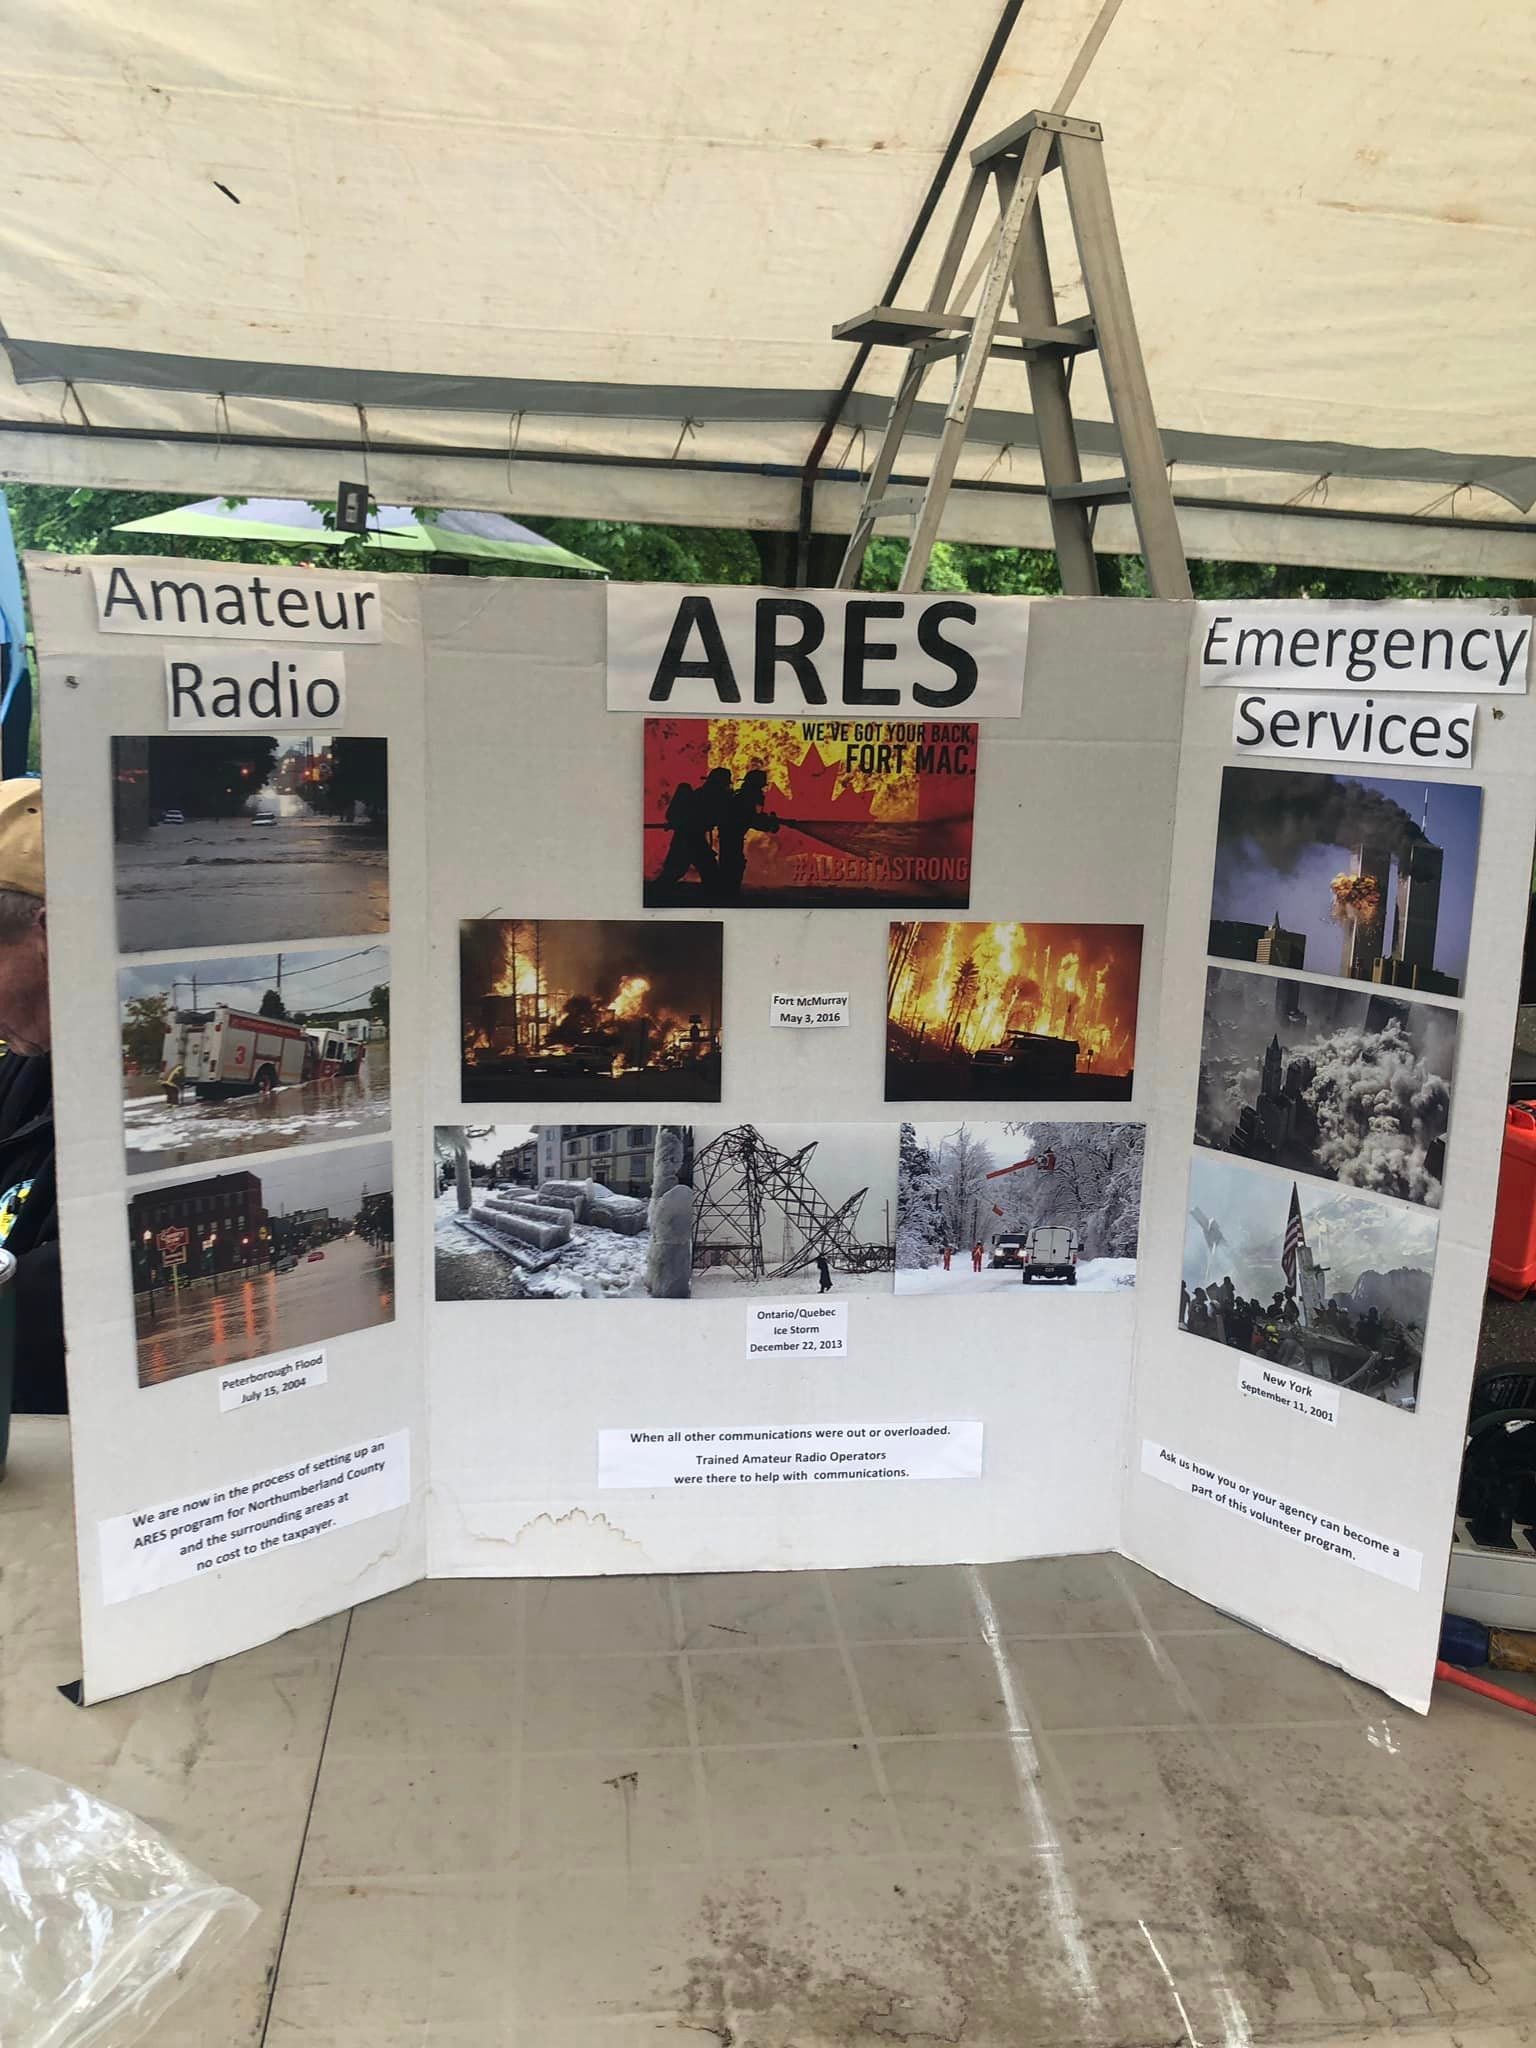 The ARES presentation board